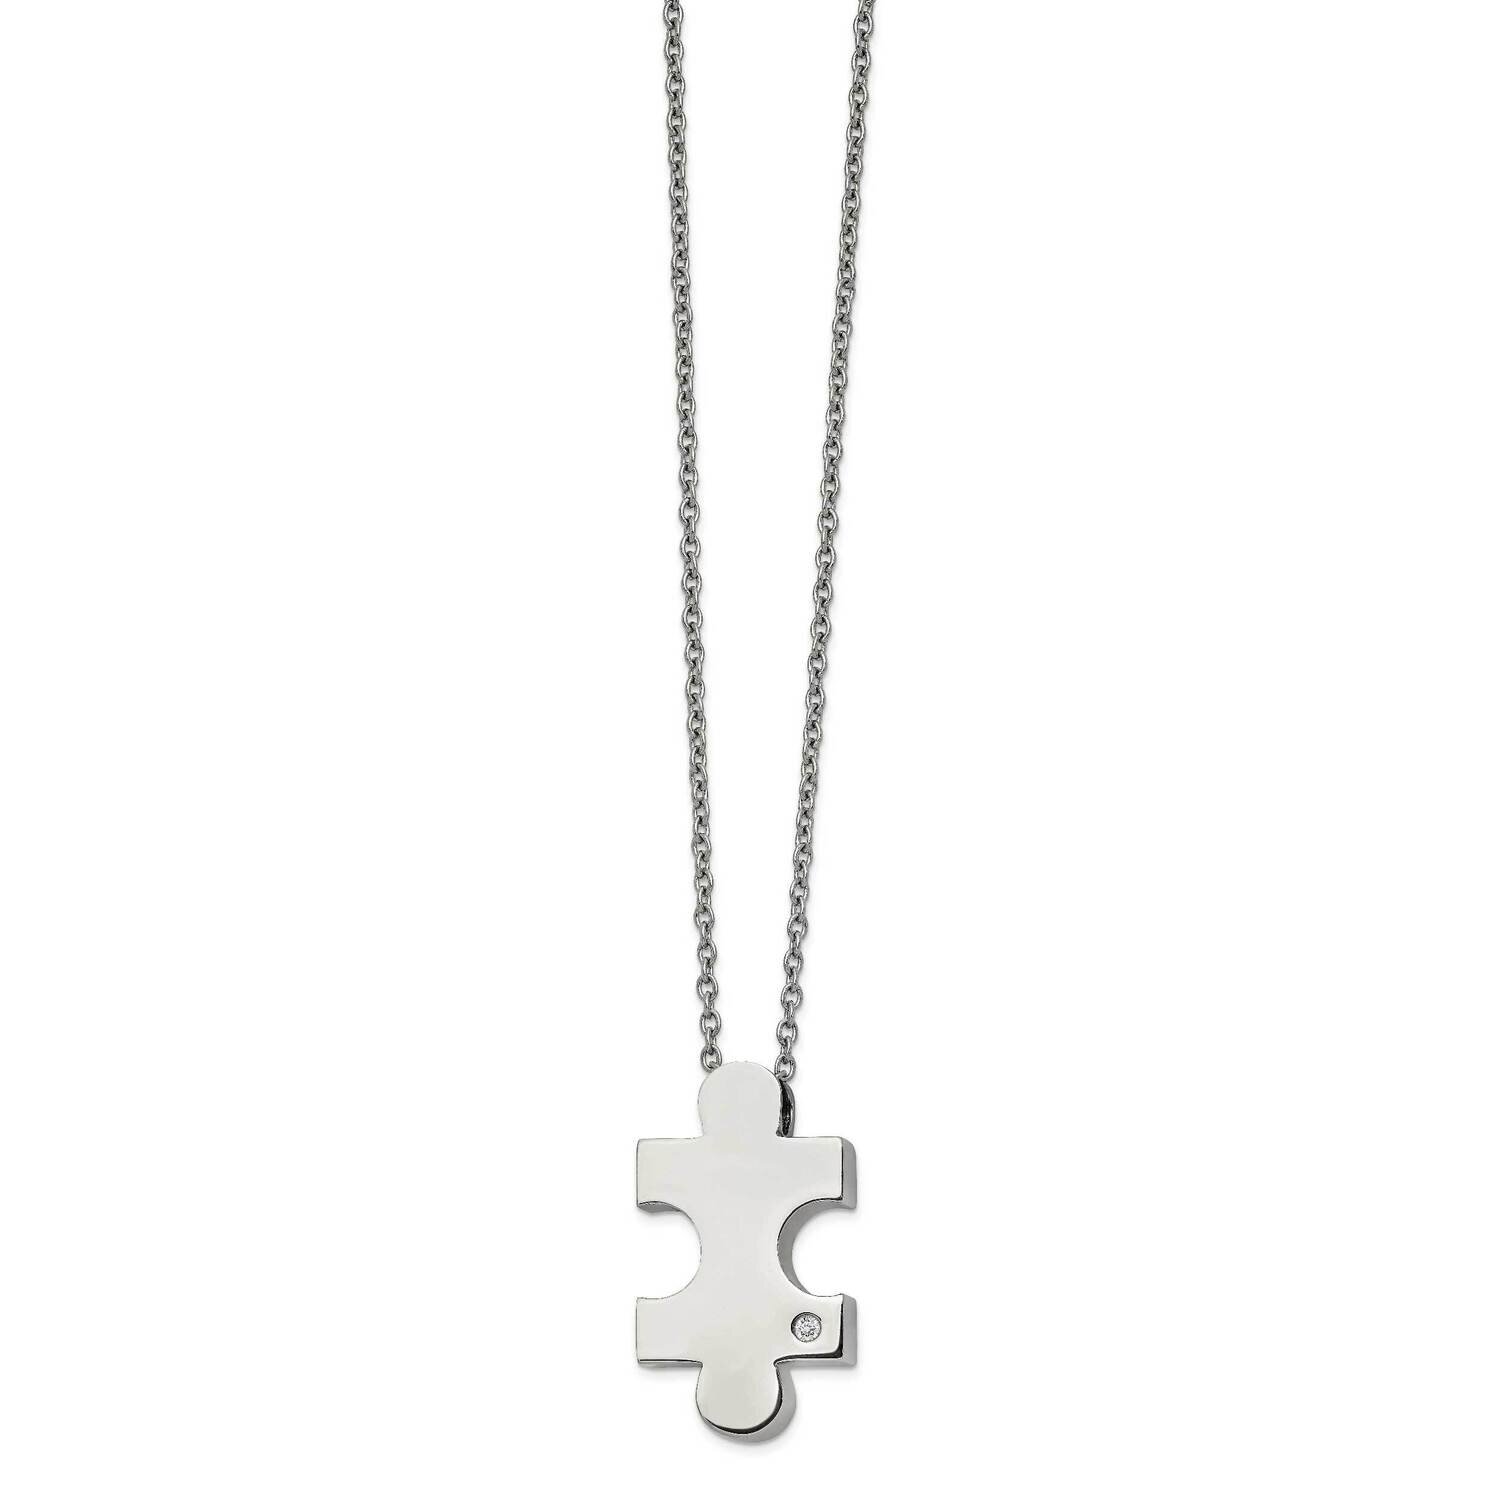 CZ Diamond Puzzle Piece 16 Inch 2.5 Inch Ext. Necklace Stainless Steel Polished SRN2747-16